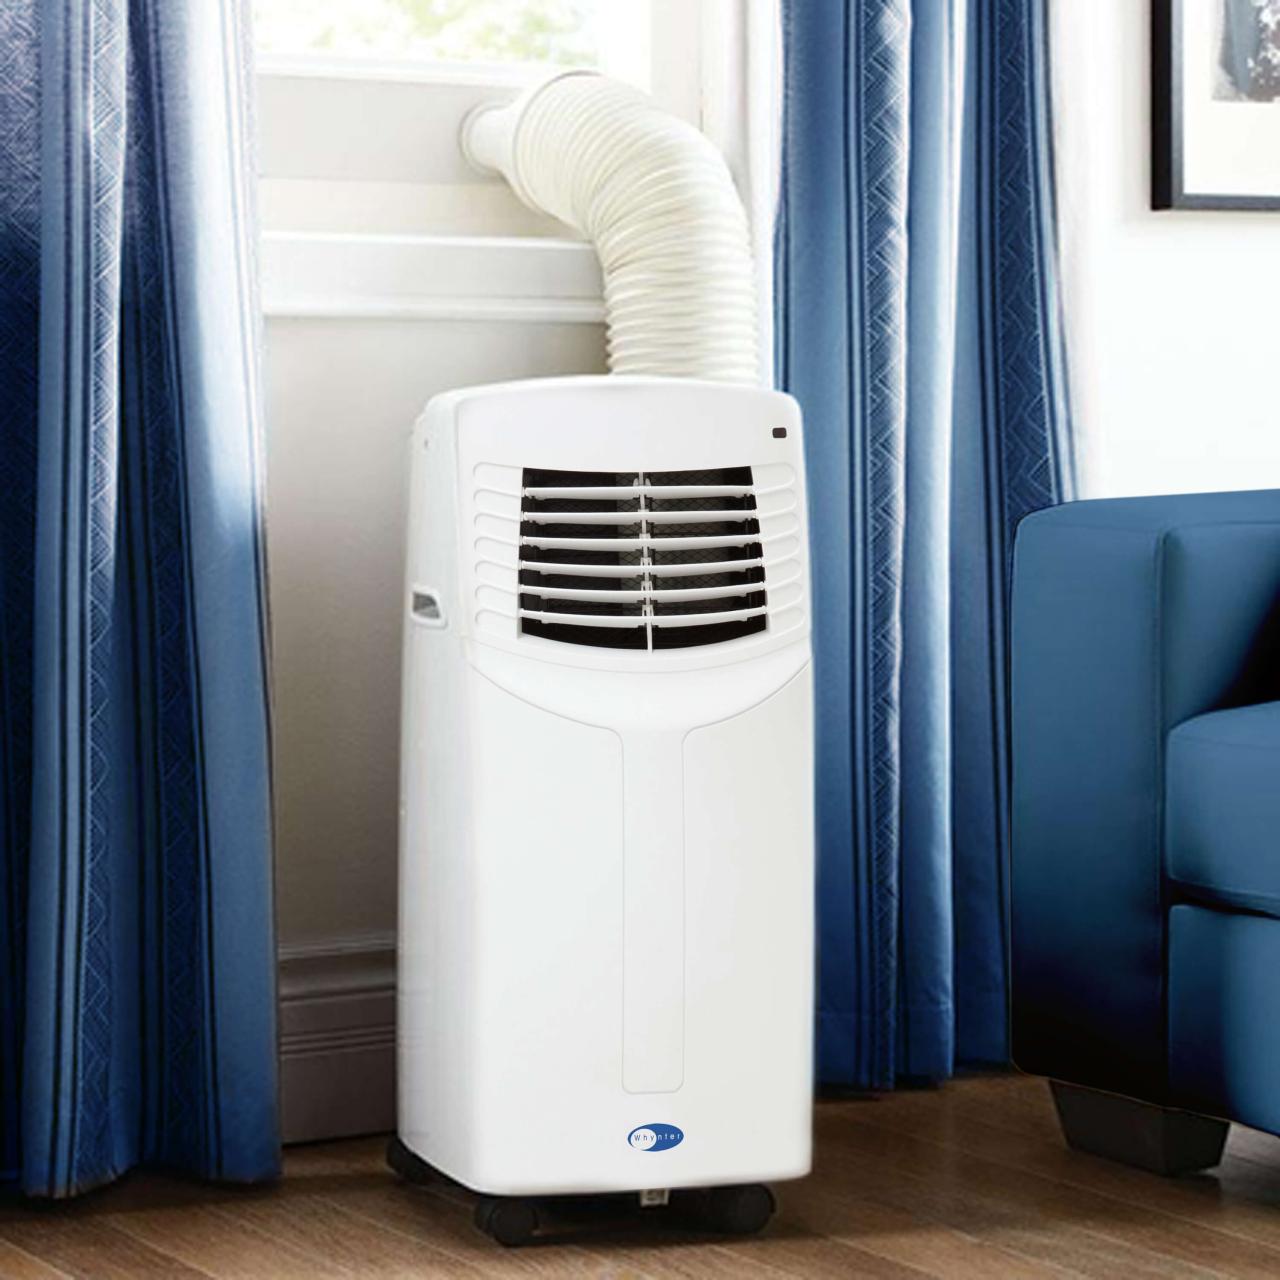 Stand alone room air conditioner